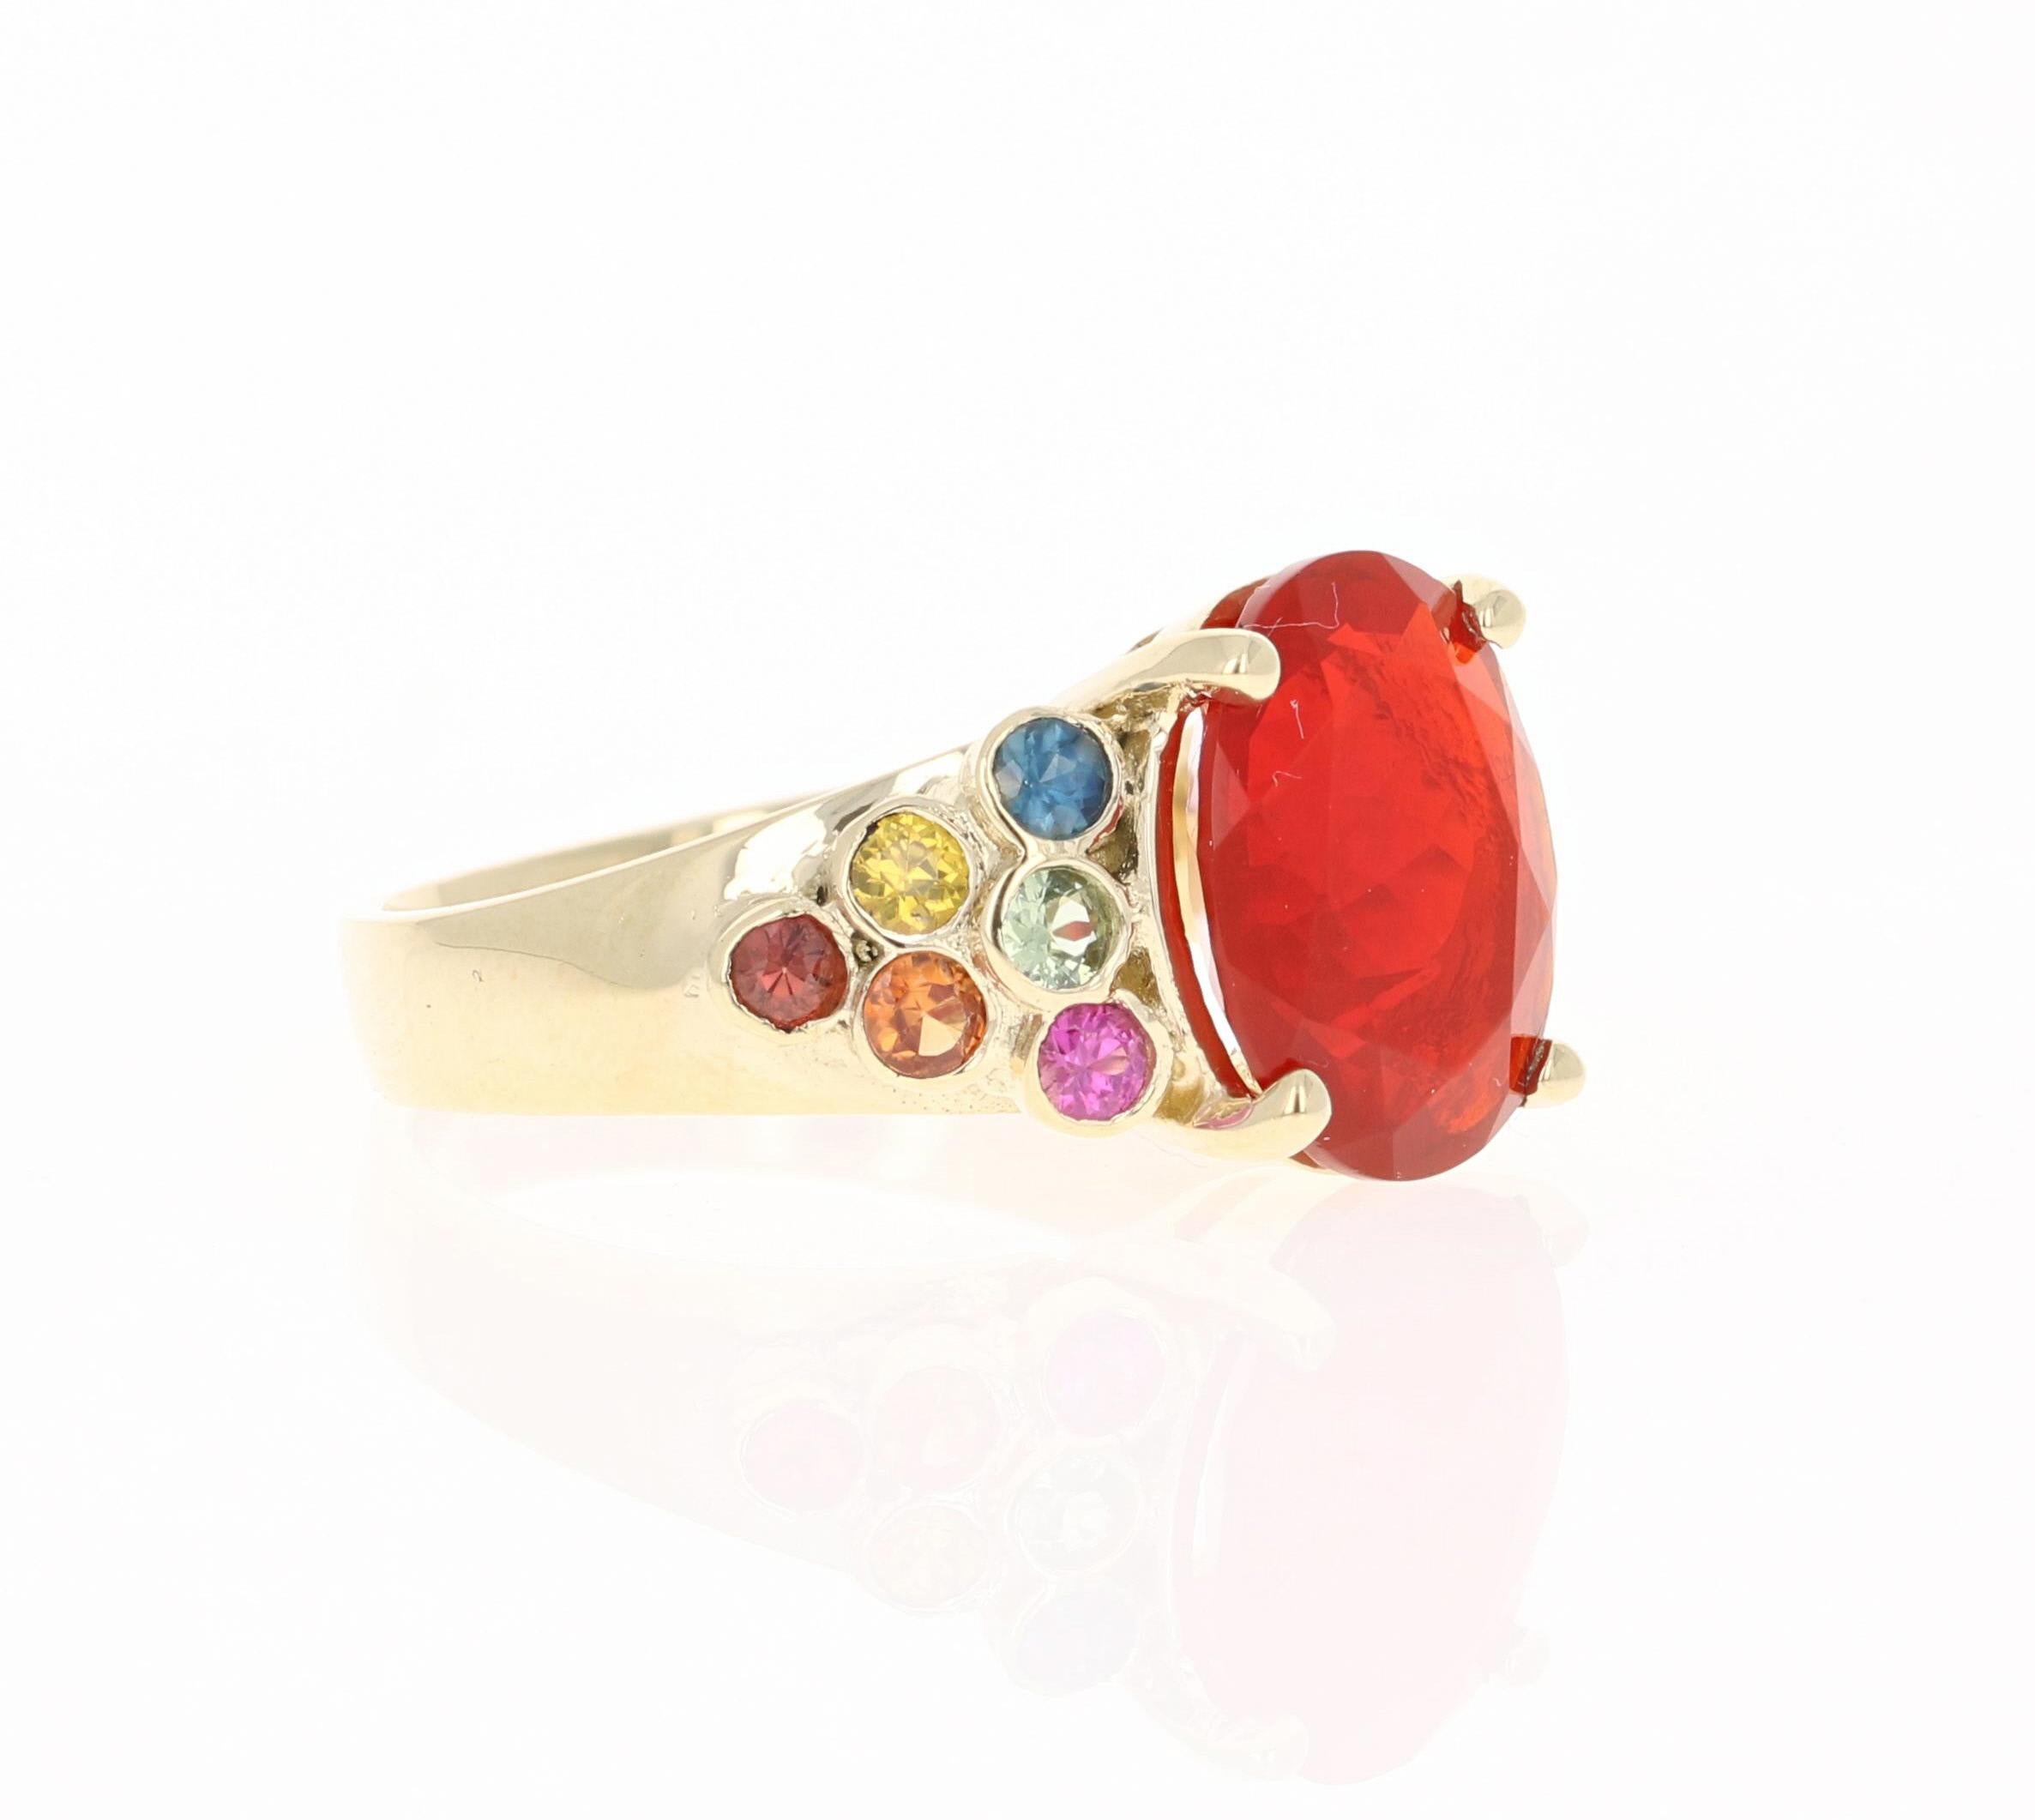 This ring has a 2.90 Carat Oval Cut Fire Opal as its center stone and is elegantly surrounded by 12 Round Cut Multi-Colored Sapphires that weigh 0.82 Carats. The measurements of the Fire Opal are 12 mm x 10 mm. 
The total carat weight of this ring